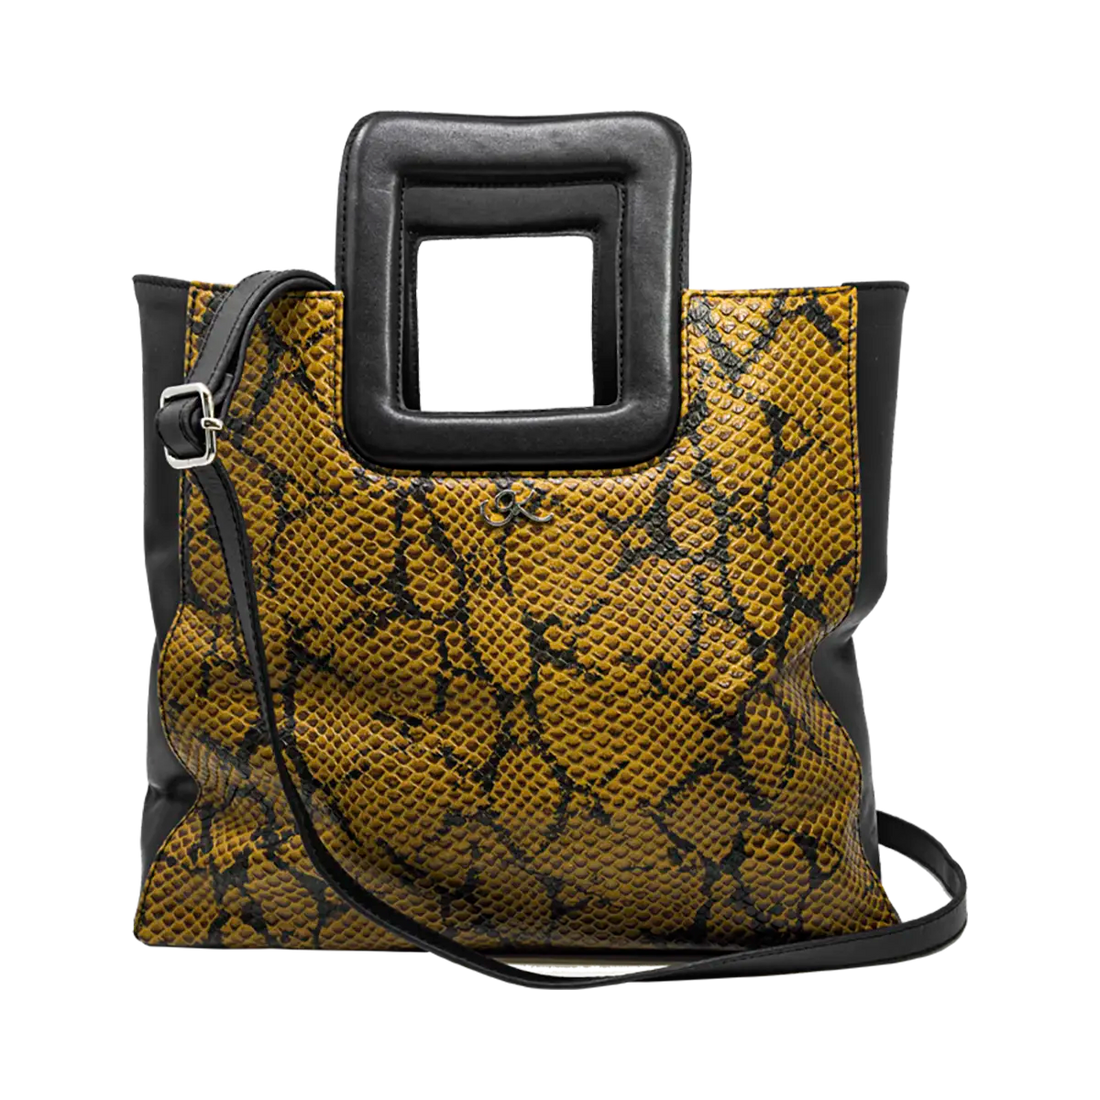 large black brown print leather print handbag with a square handle. Accessory for women in San Diego, CA.